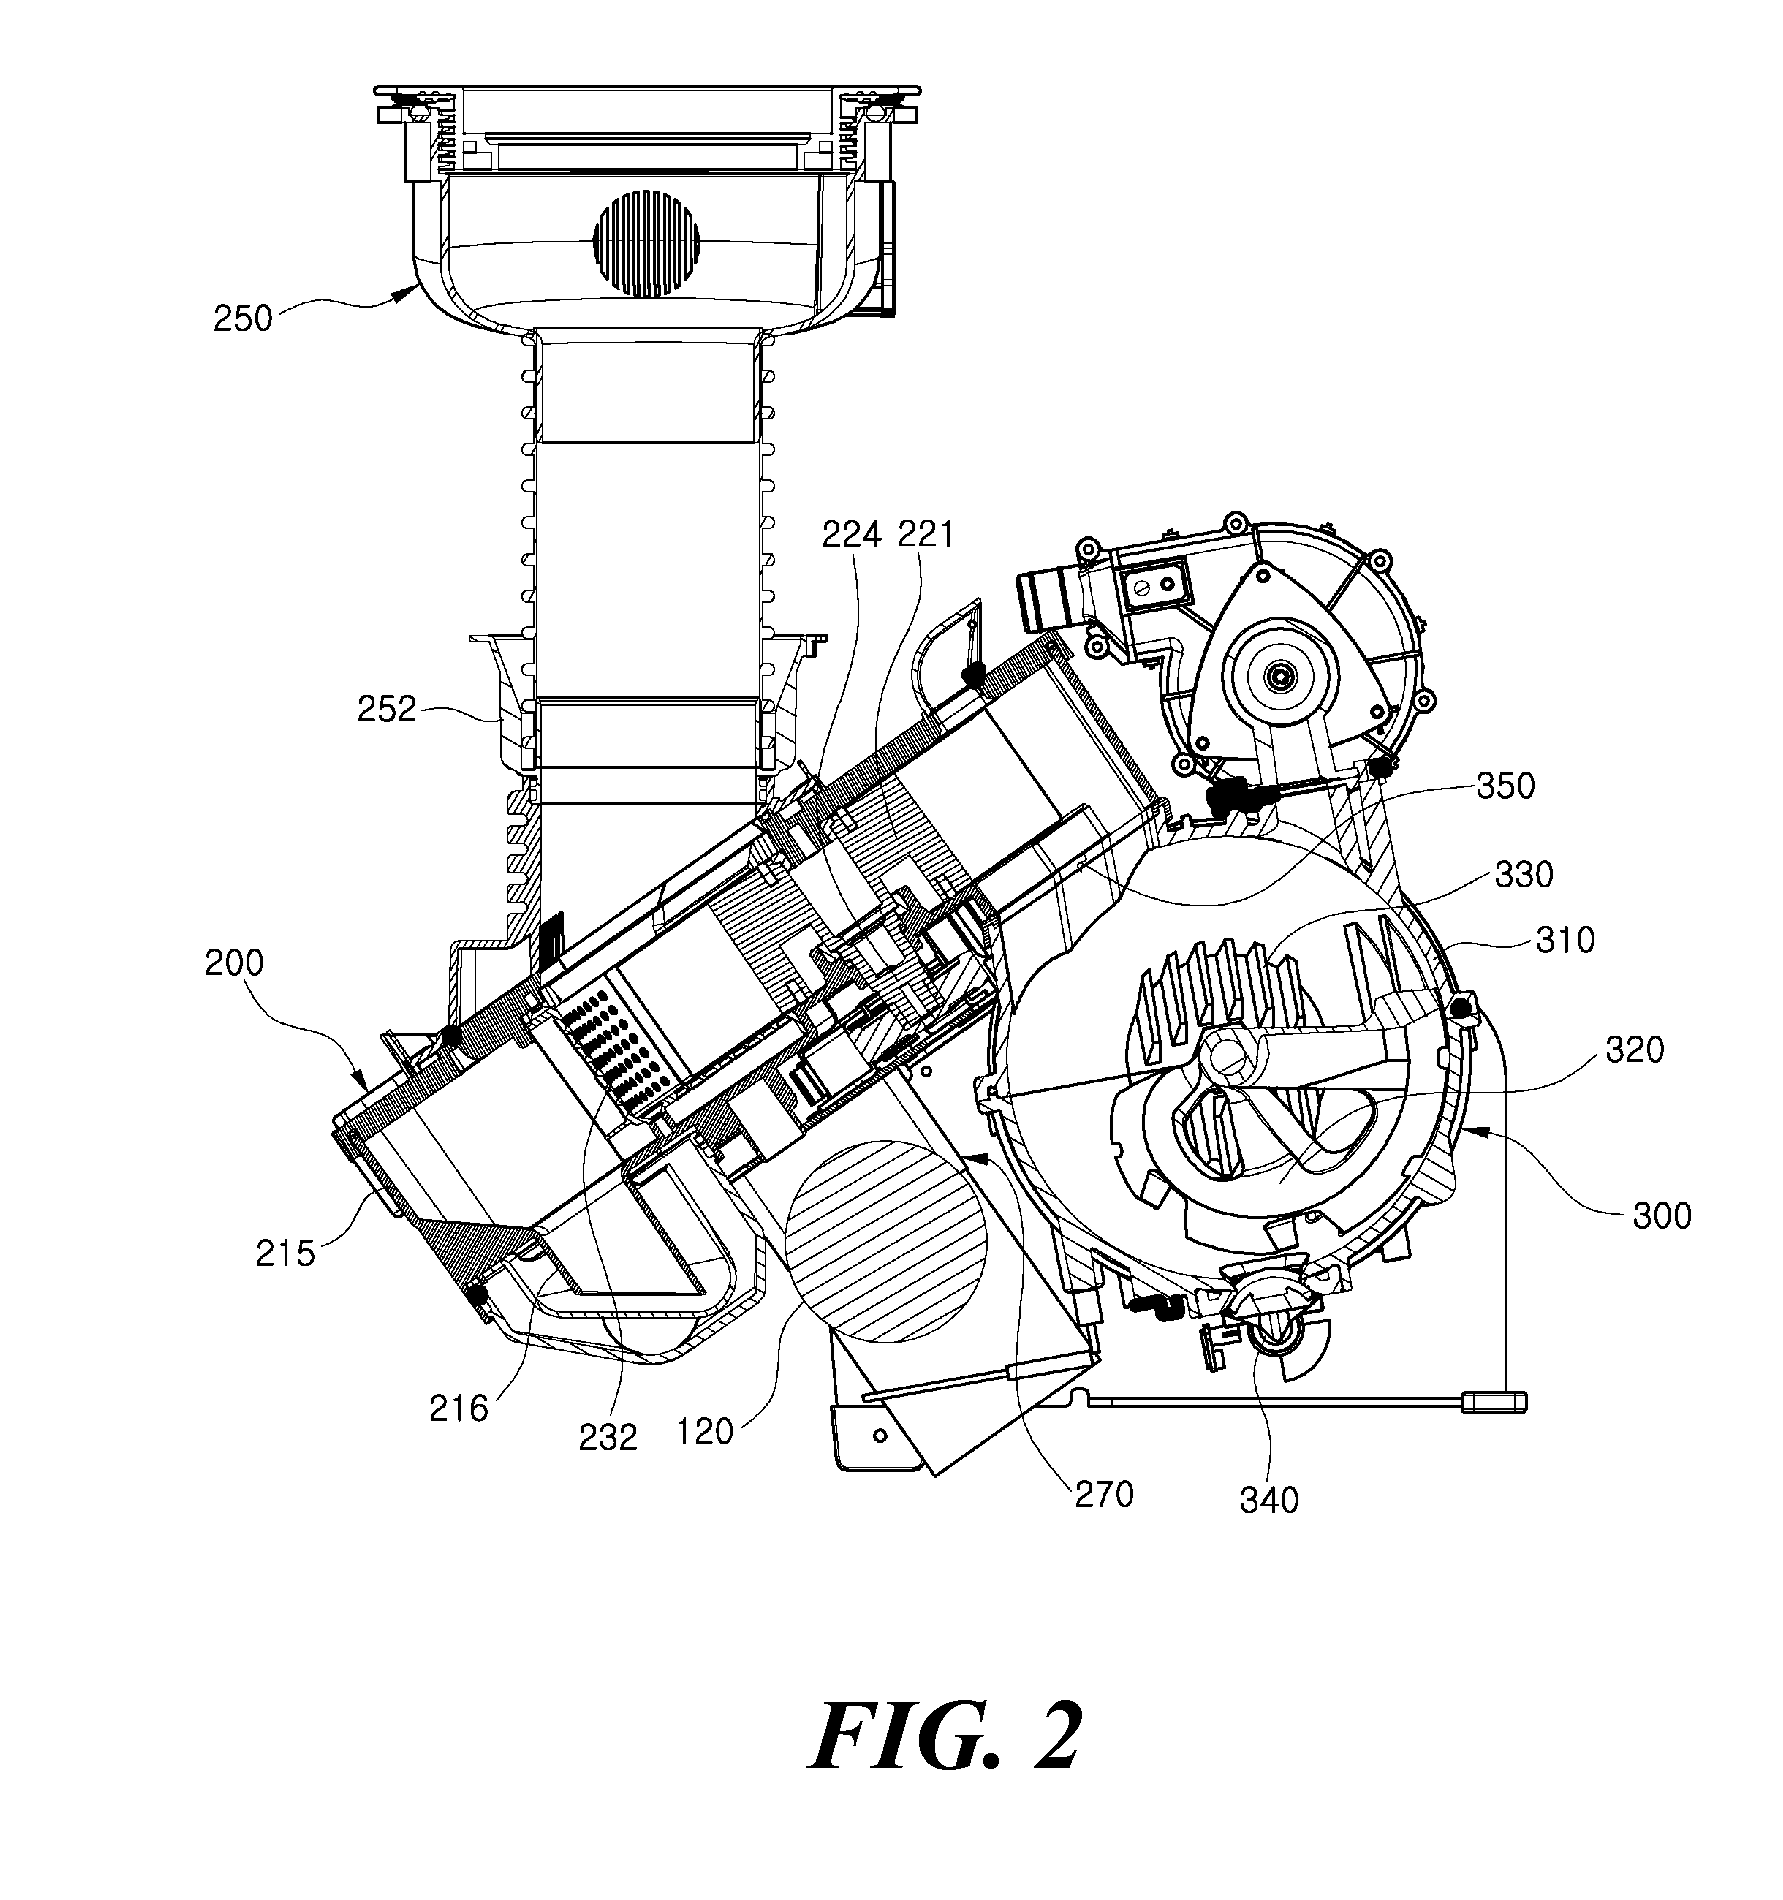 Transfer unit having transfer rotor and food waste treatment apparatus using the same